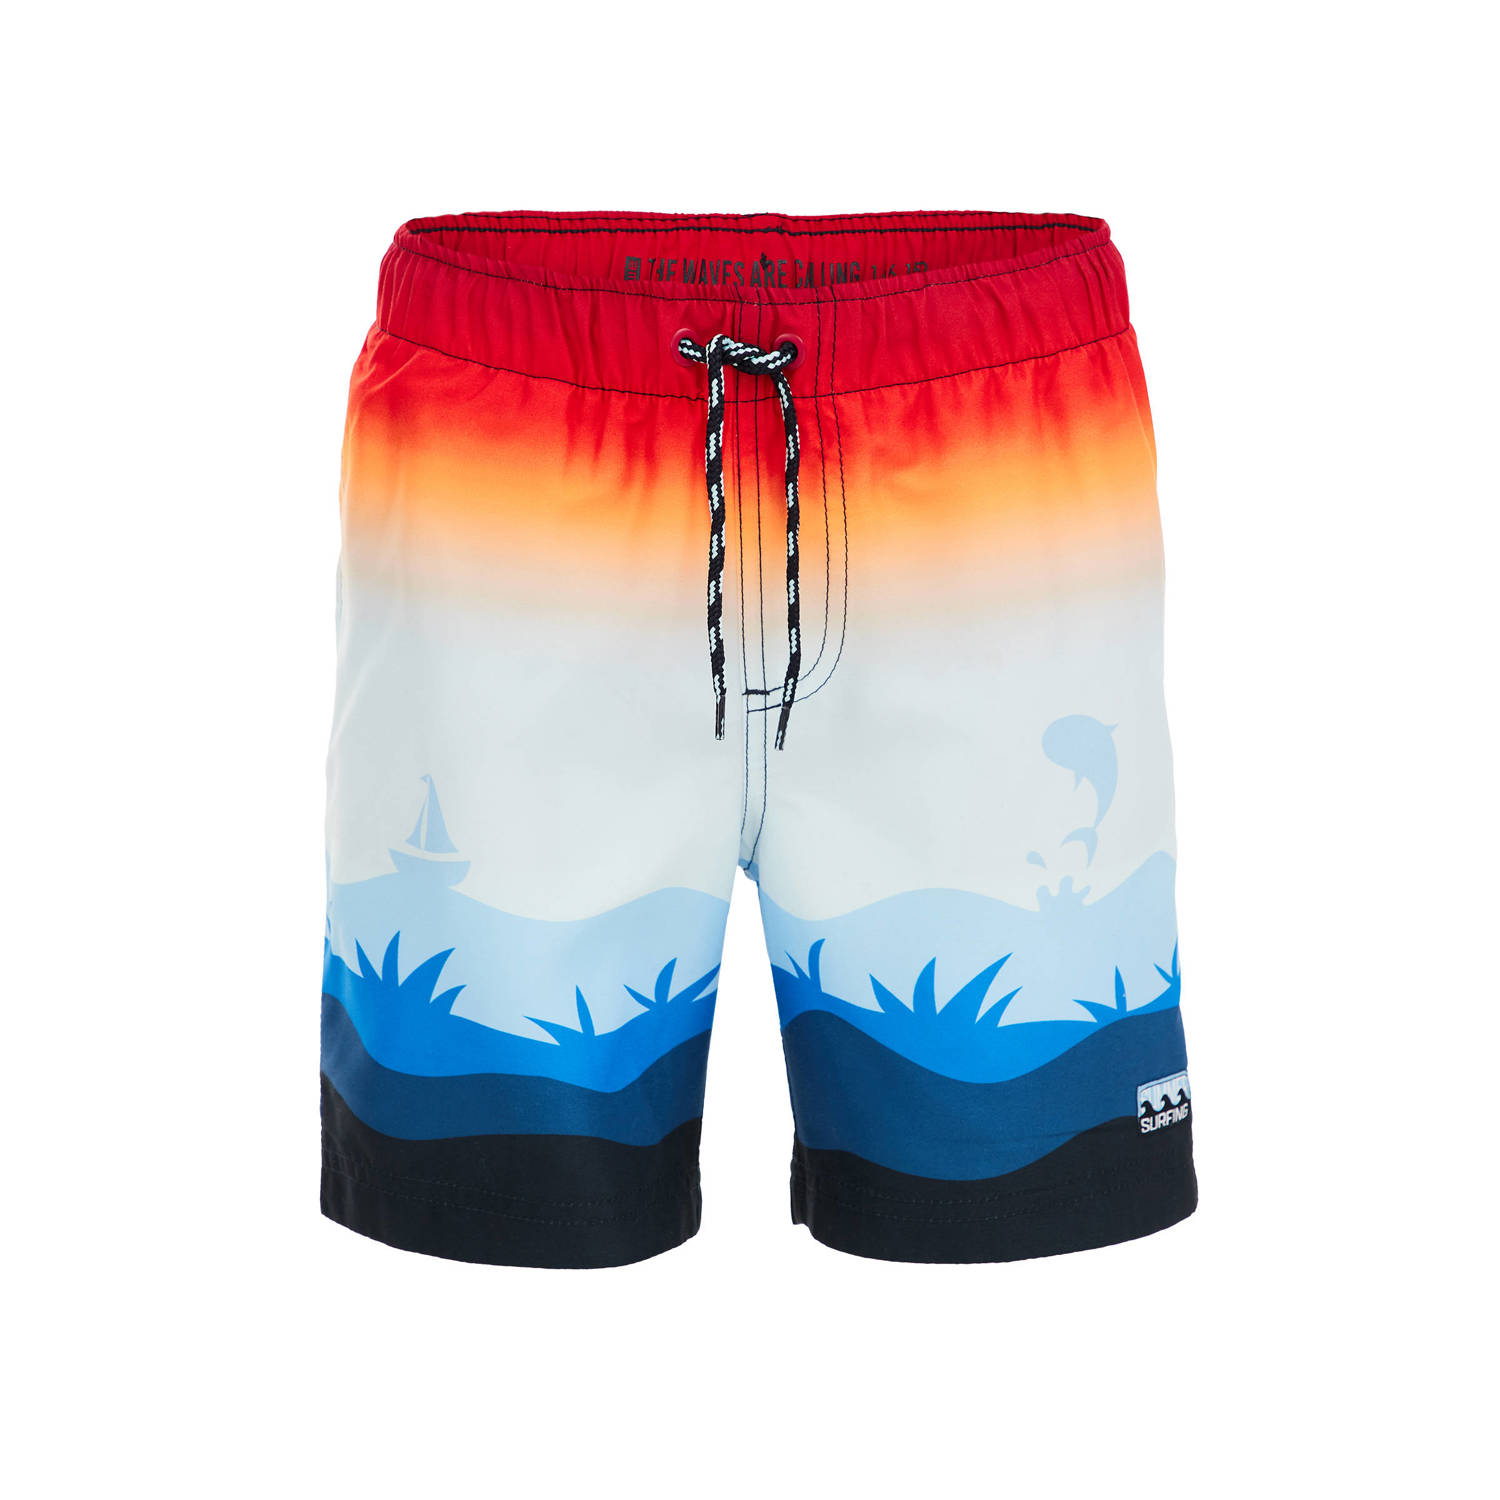 WE Fashion zwemshort rood blauw oranje Jongens Gerecycled polyester All over print 122 128